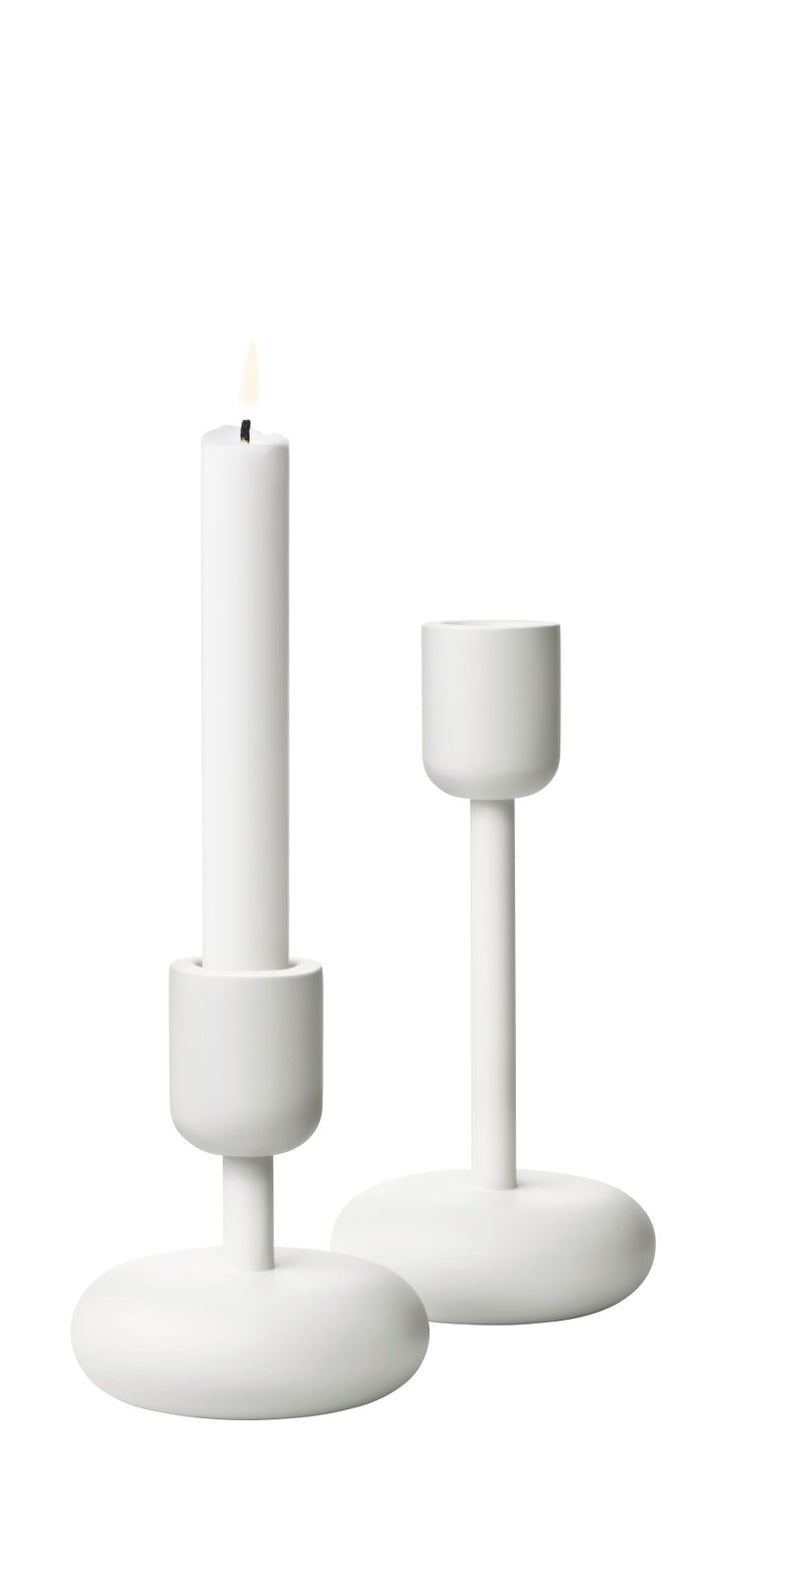 media image for Nappula Candleholder in Various Sizes & Colors design by Matti Klenell for Iittala 275